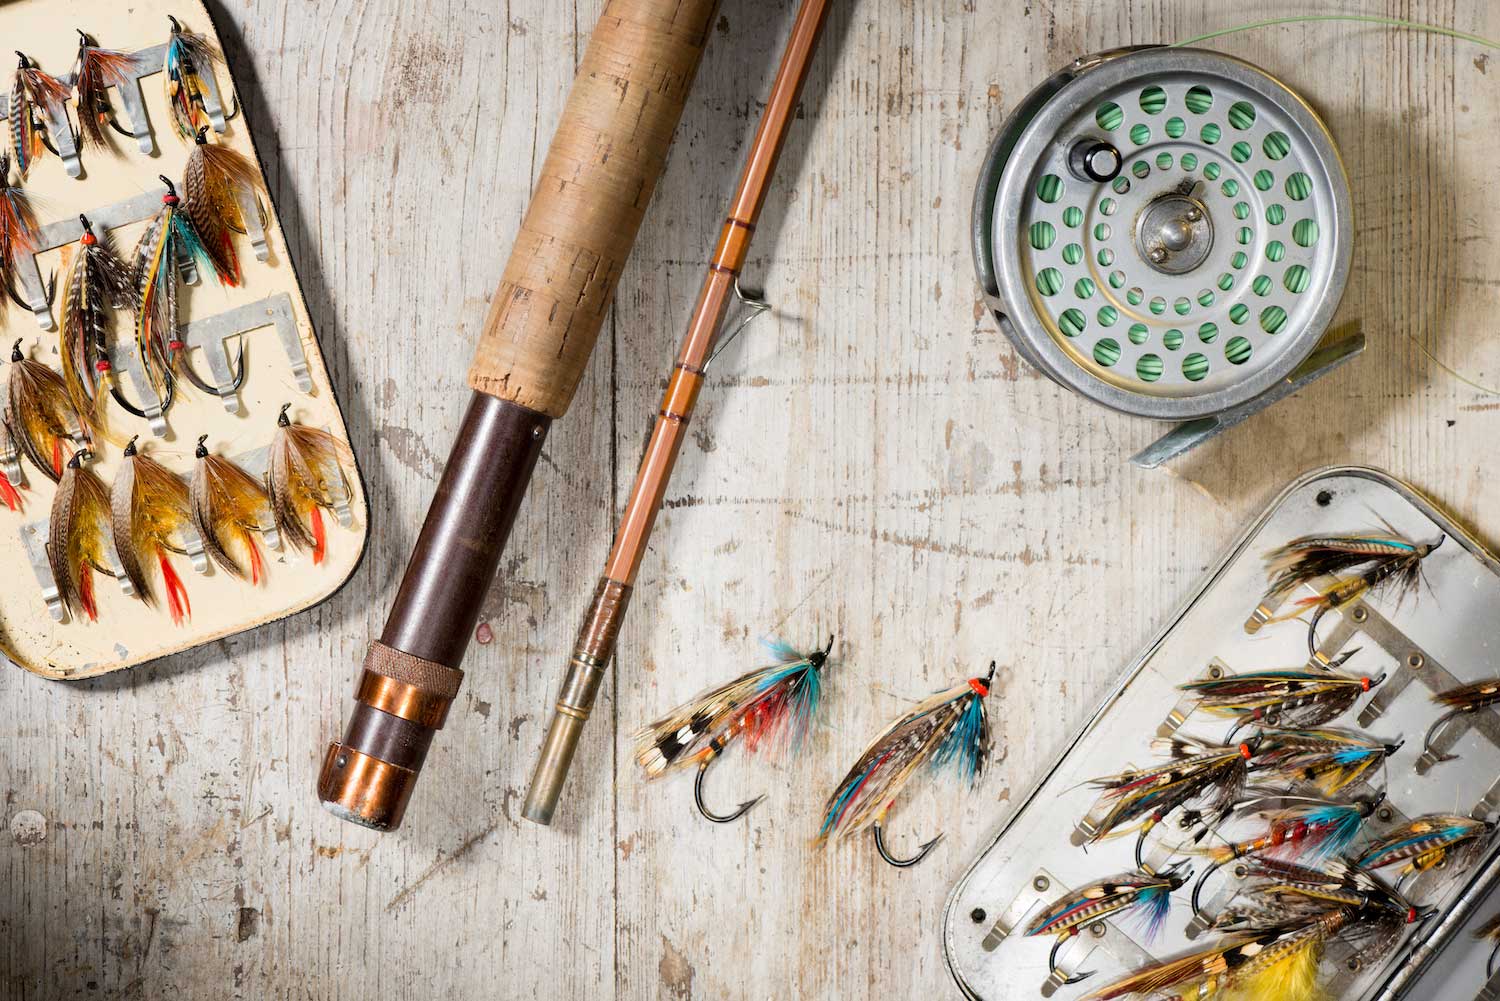 Fly-fishing lures and a fly-fishing rod on a wooden surface. 